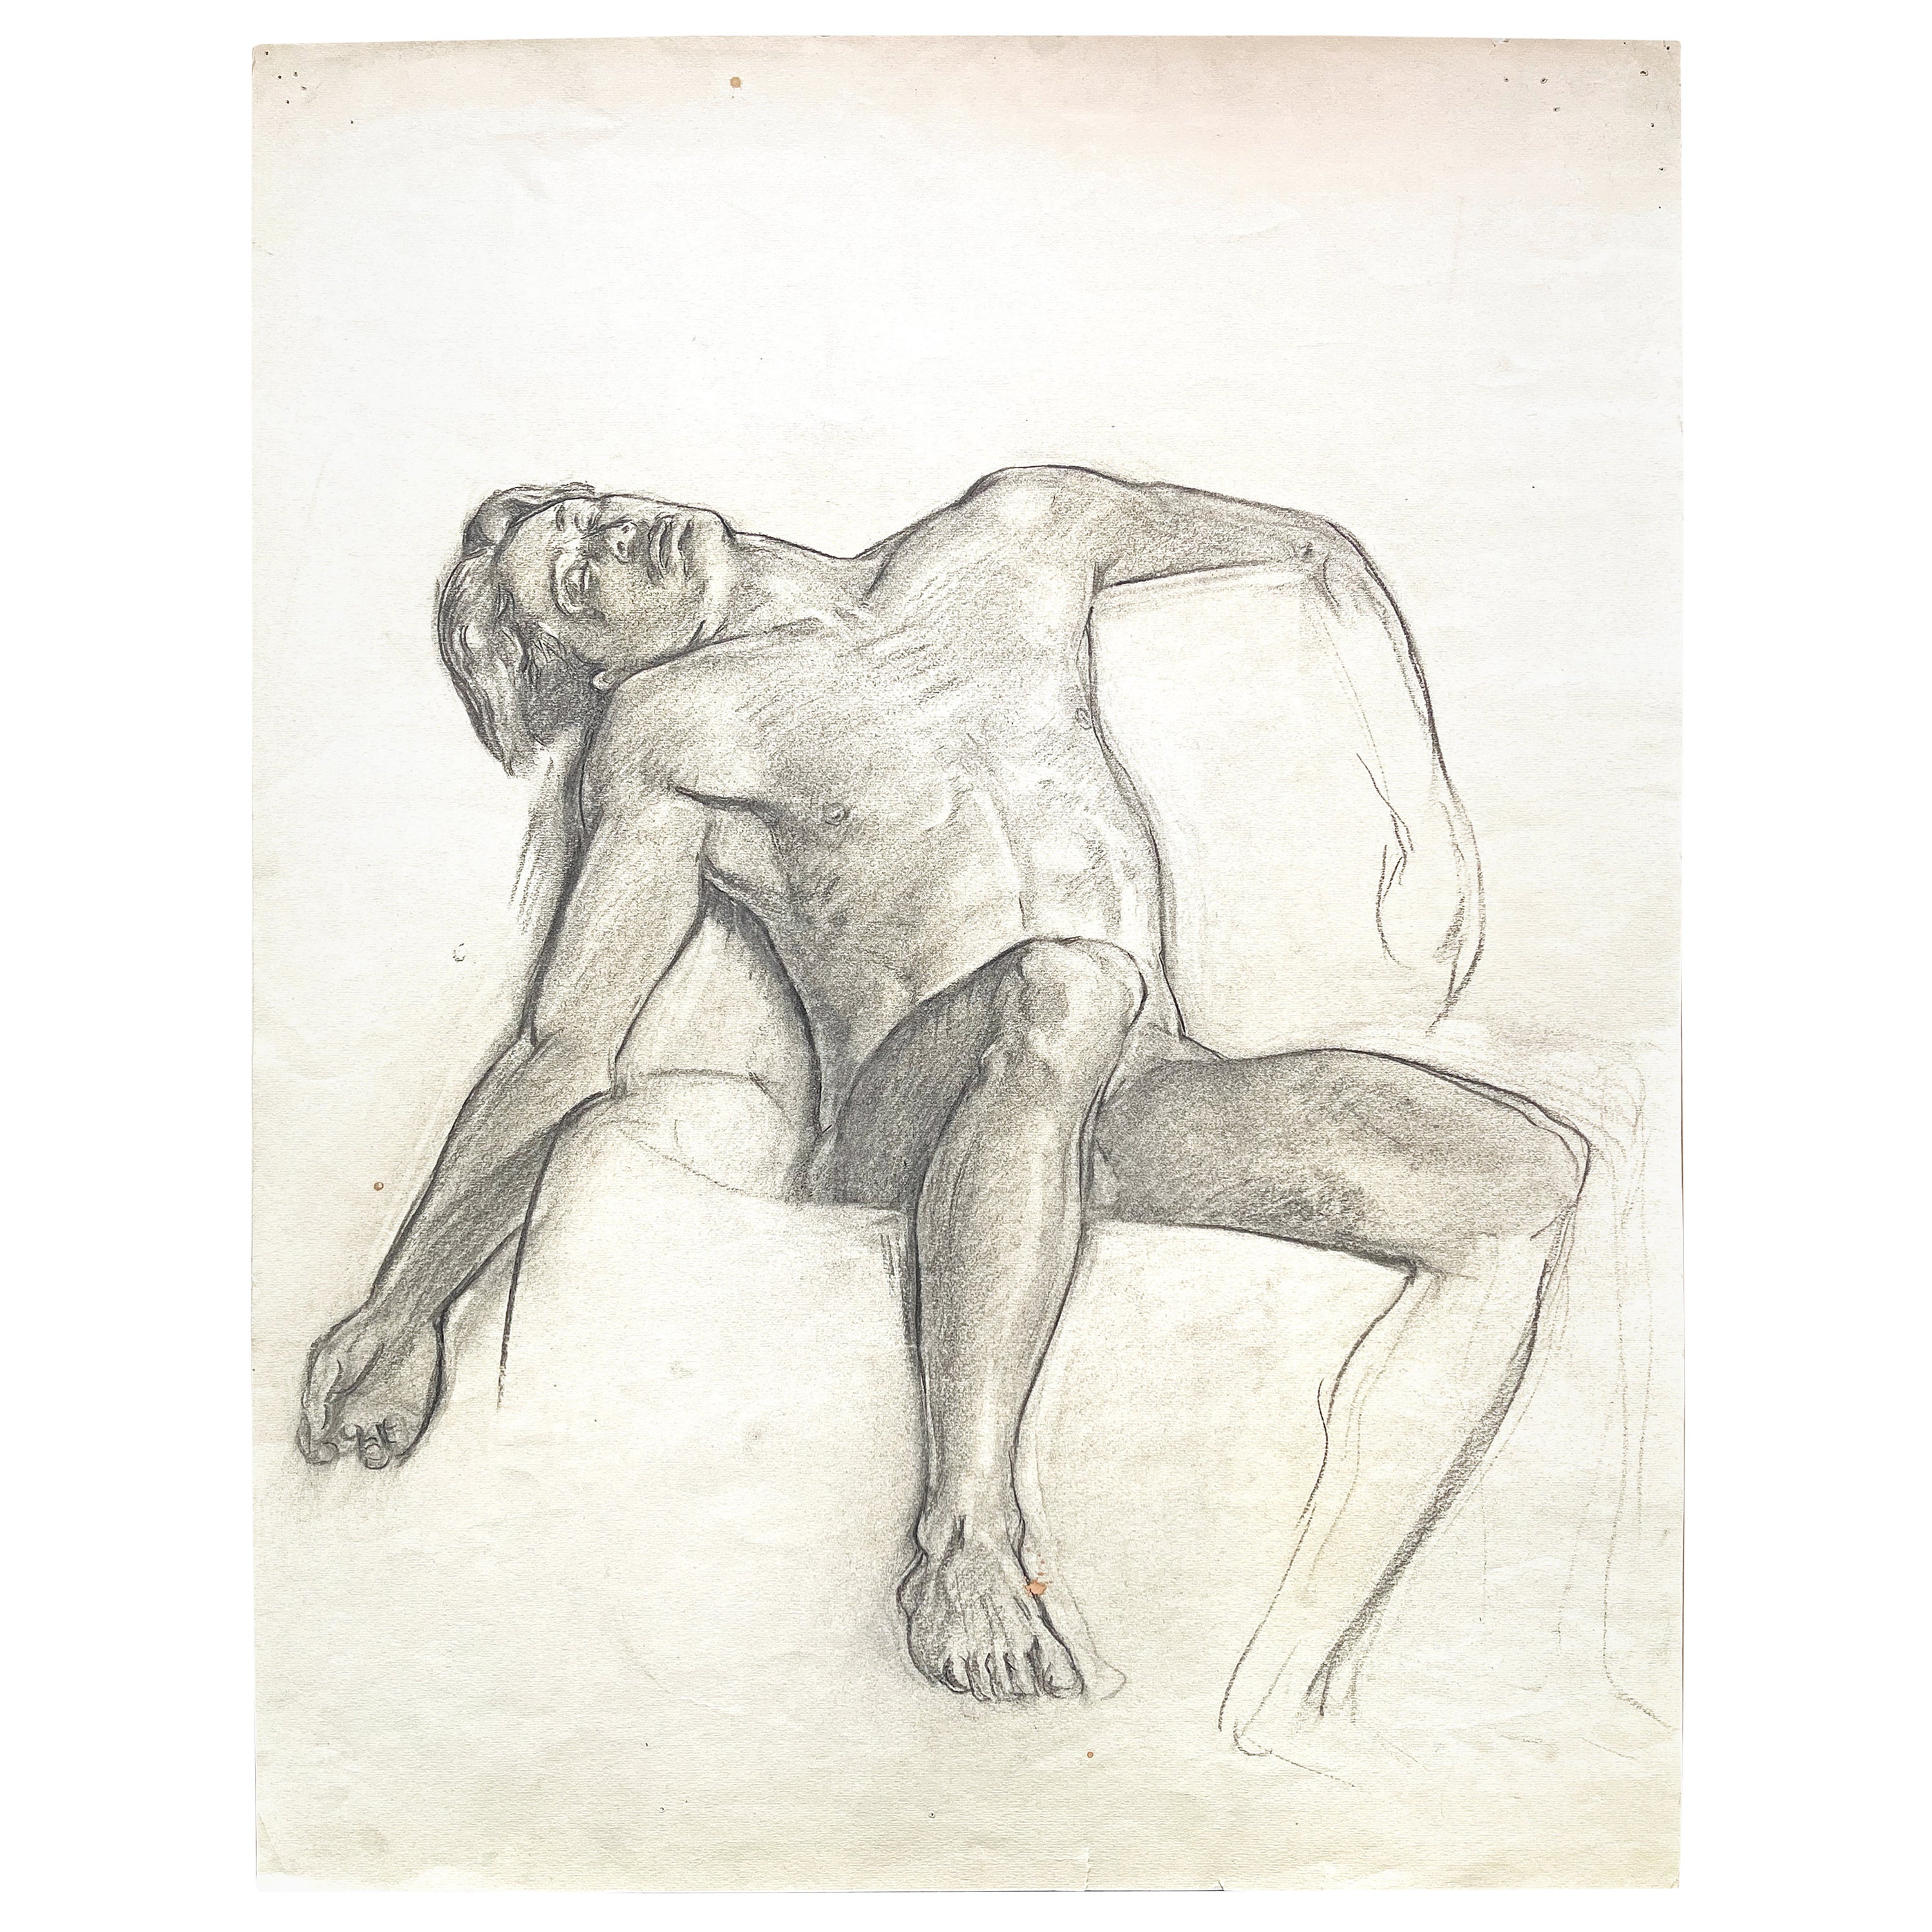 "Sleeping Nude, Arms Akimbo, " Masterful Drawing by Allyn Cox, Capitol Muralist